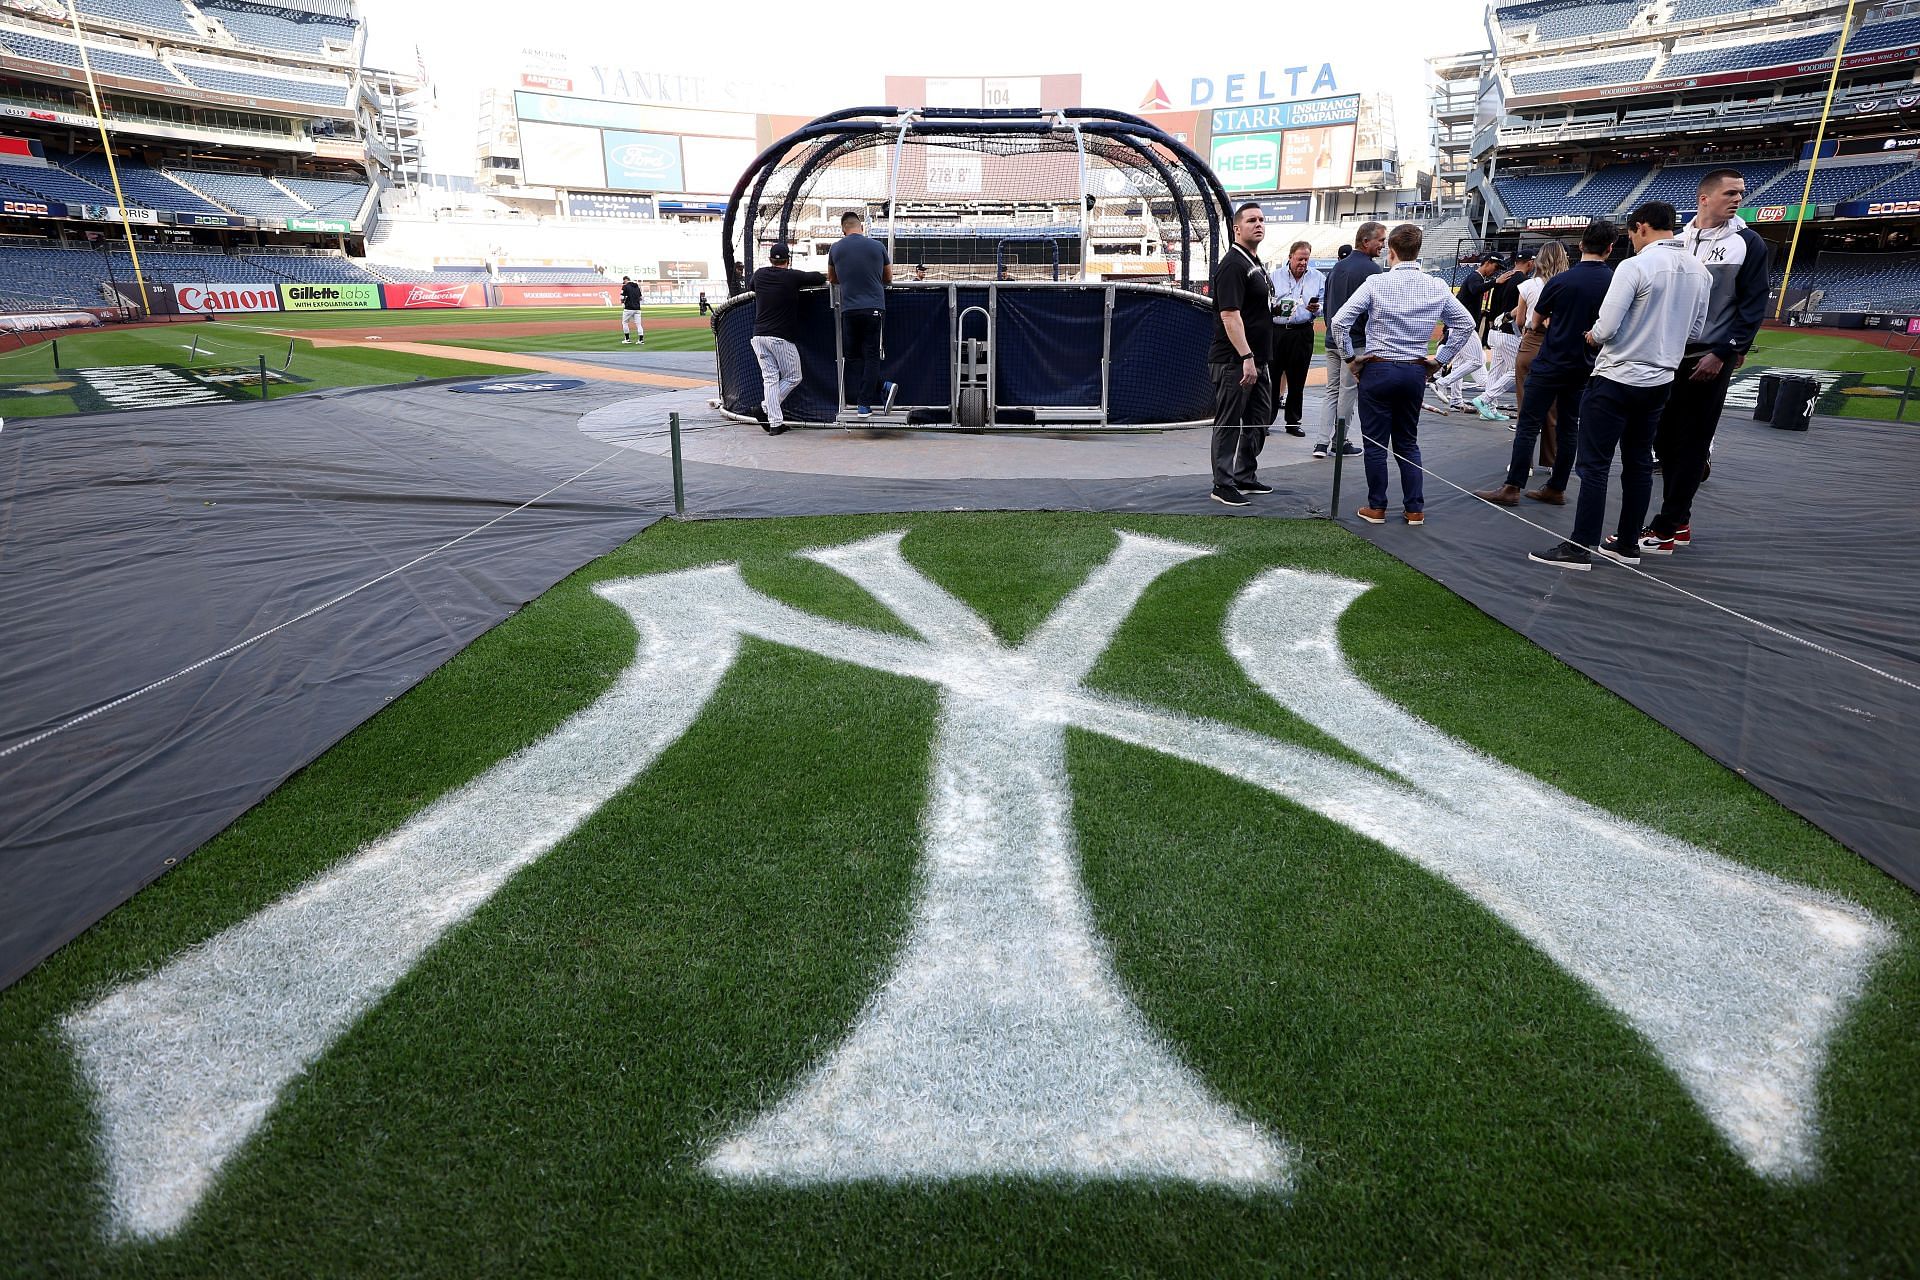 Yankees radio stations Where to listen to Yankees games for free in 2023? WFAN Affiliate Radio Stations and Frequencies